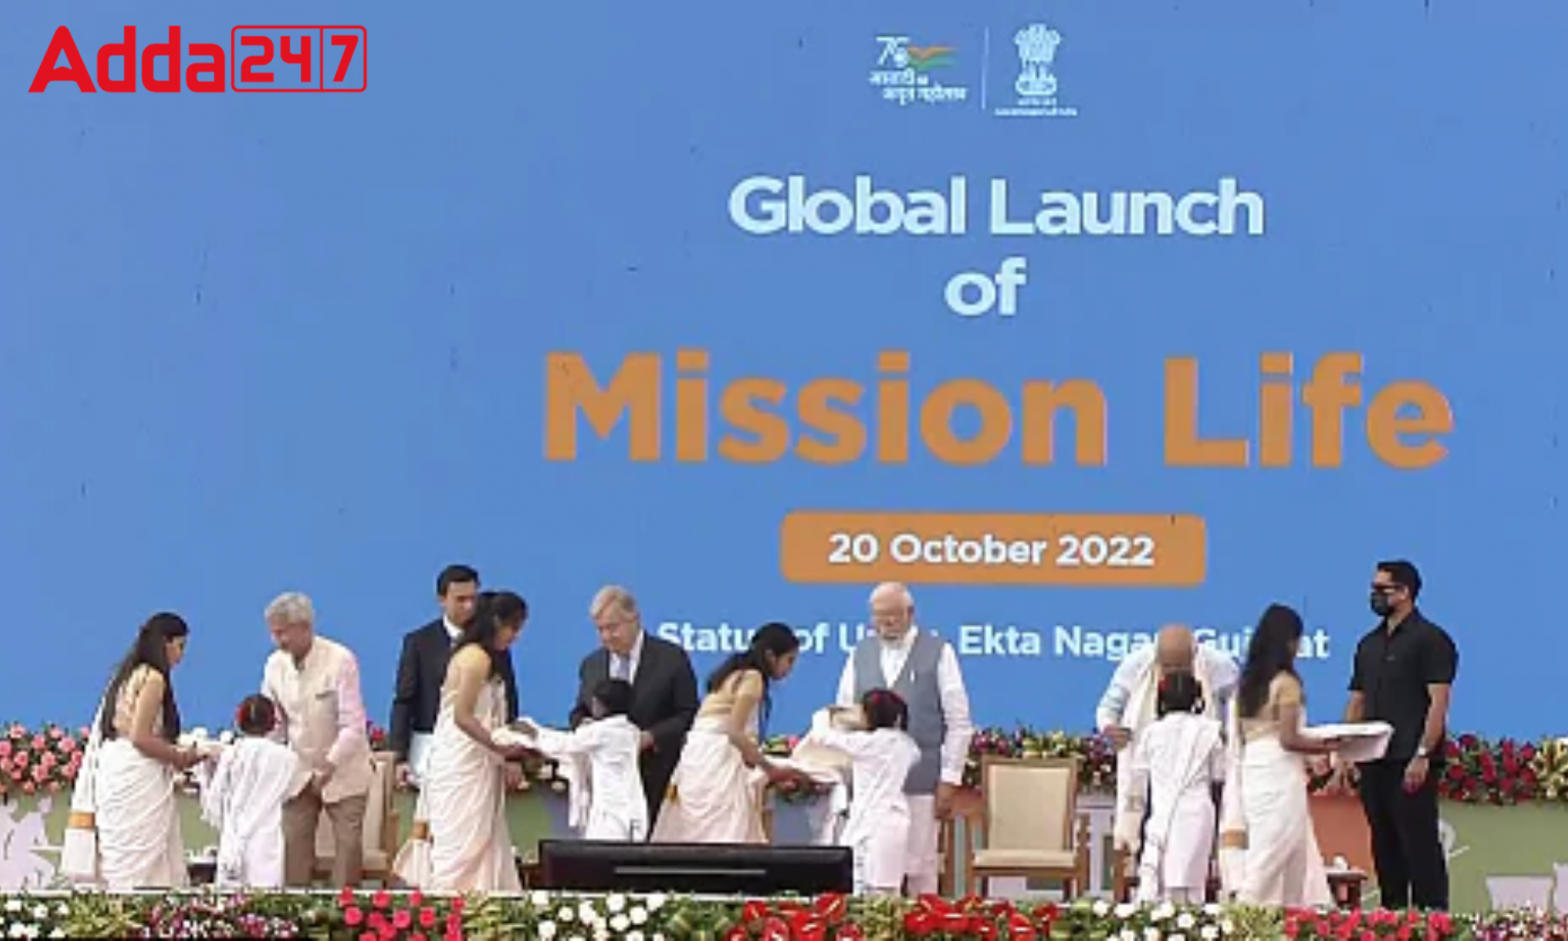 Mission LIFE movement launched by PM Modi